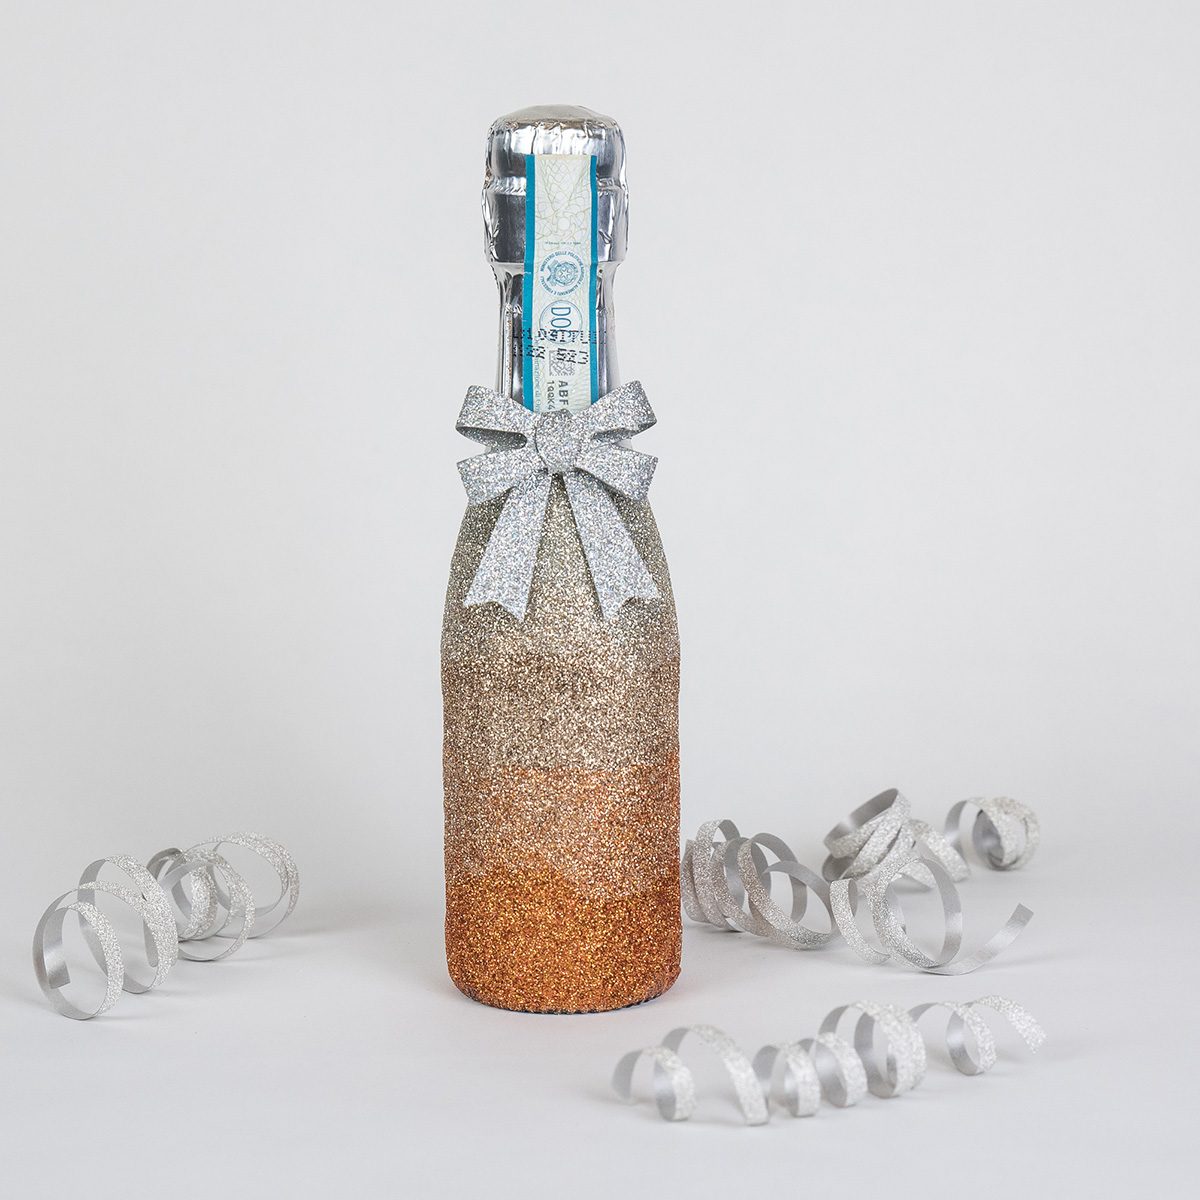 Learn How To Glitter Champagne Bottles - the right way!